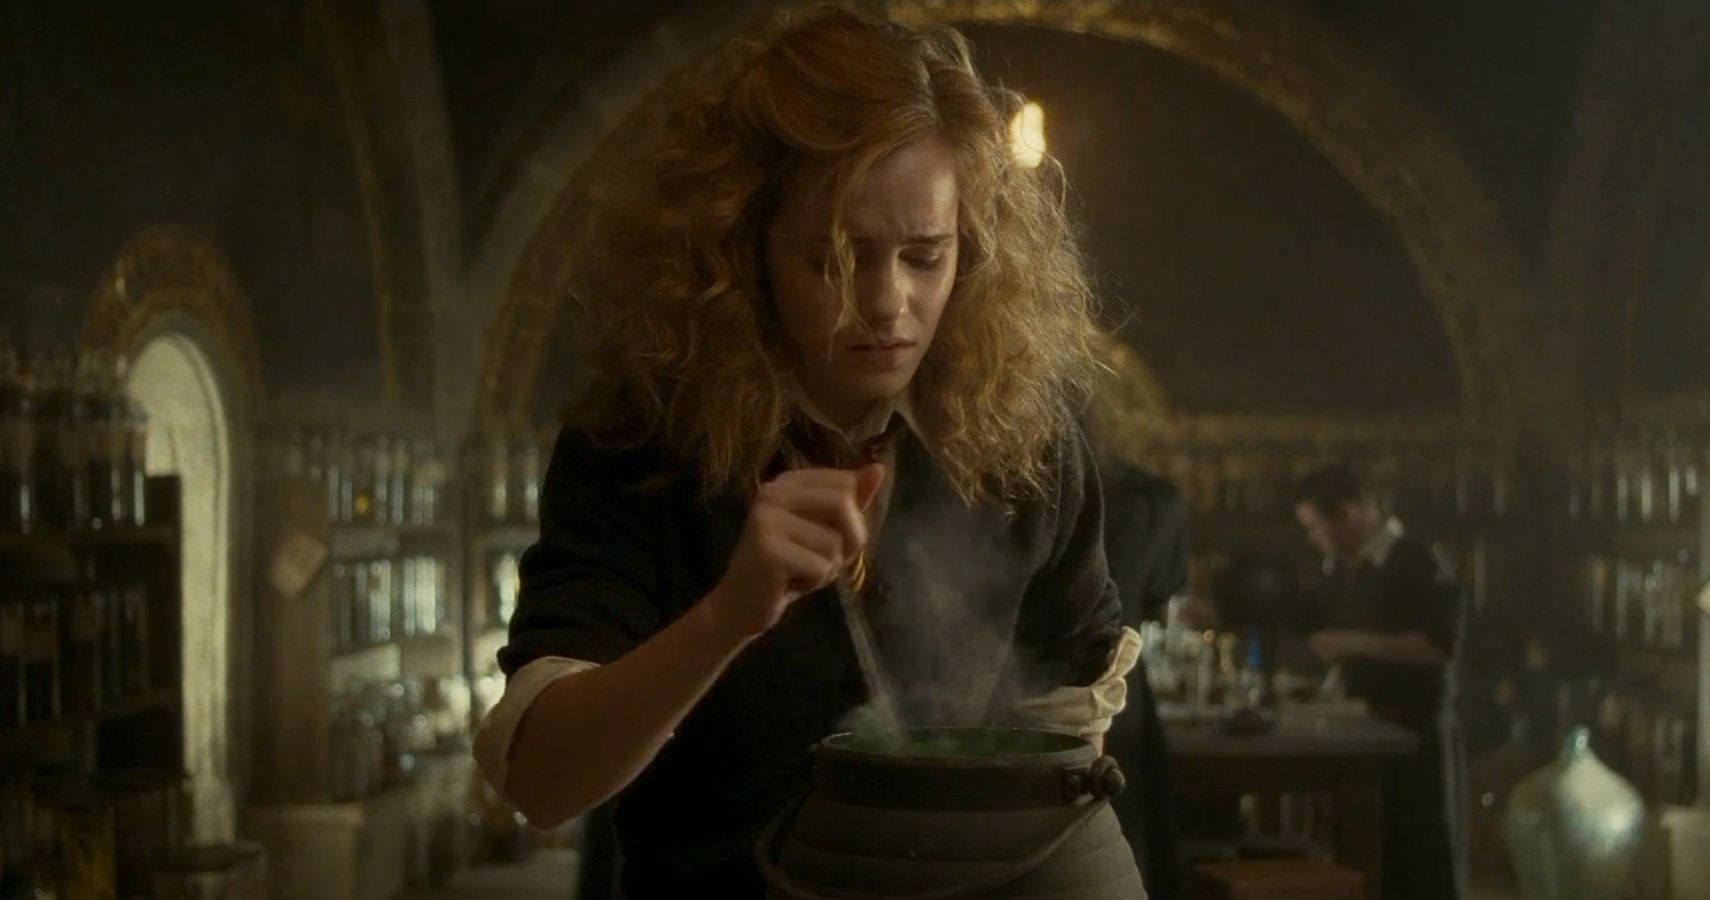 Hermione tries to brew a potion and her hair gets frizzy